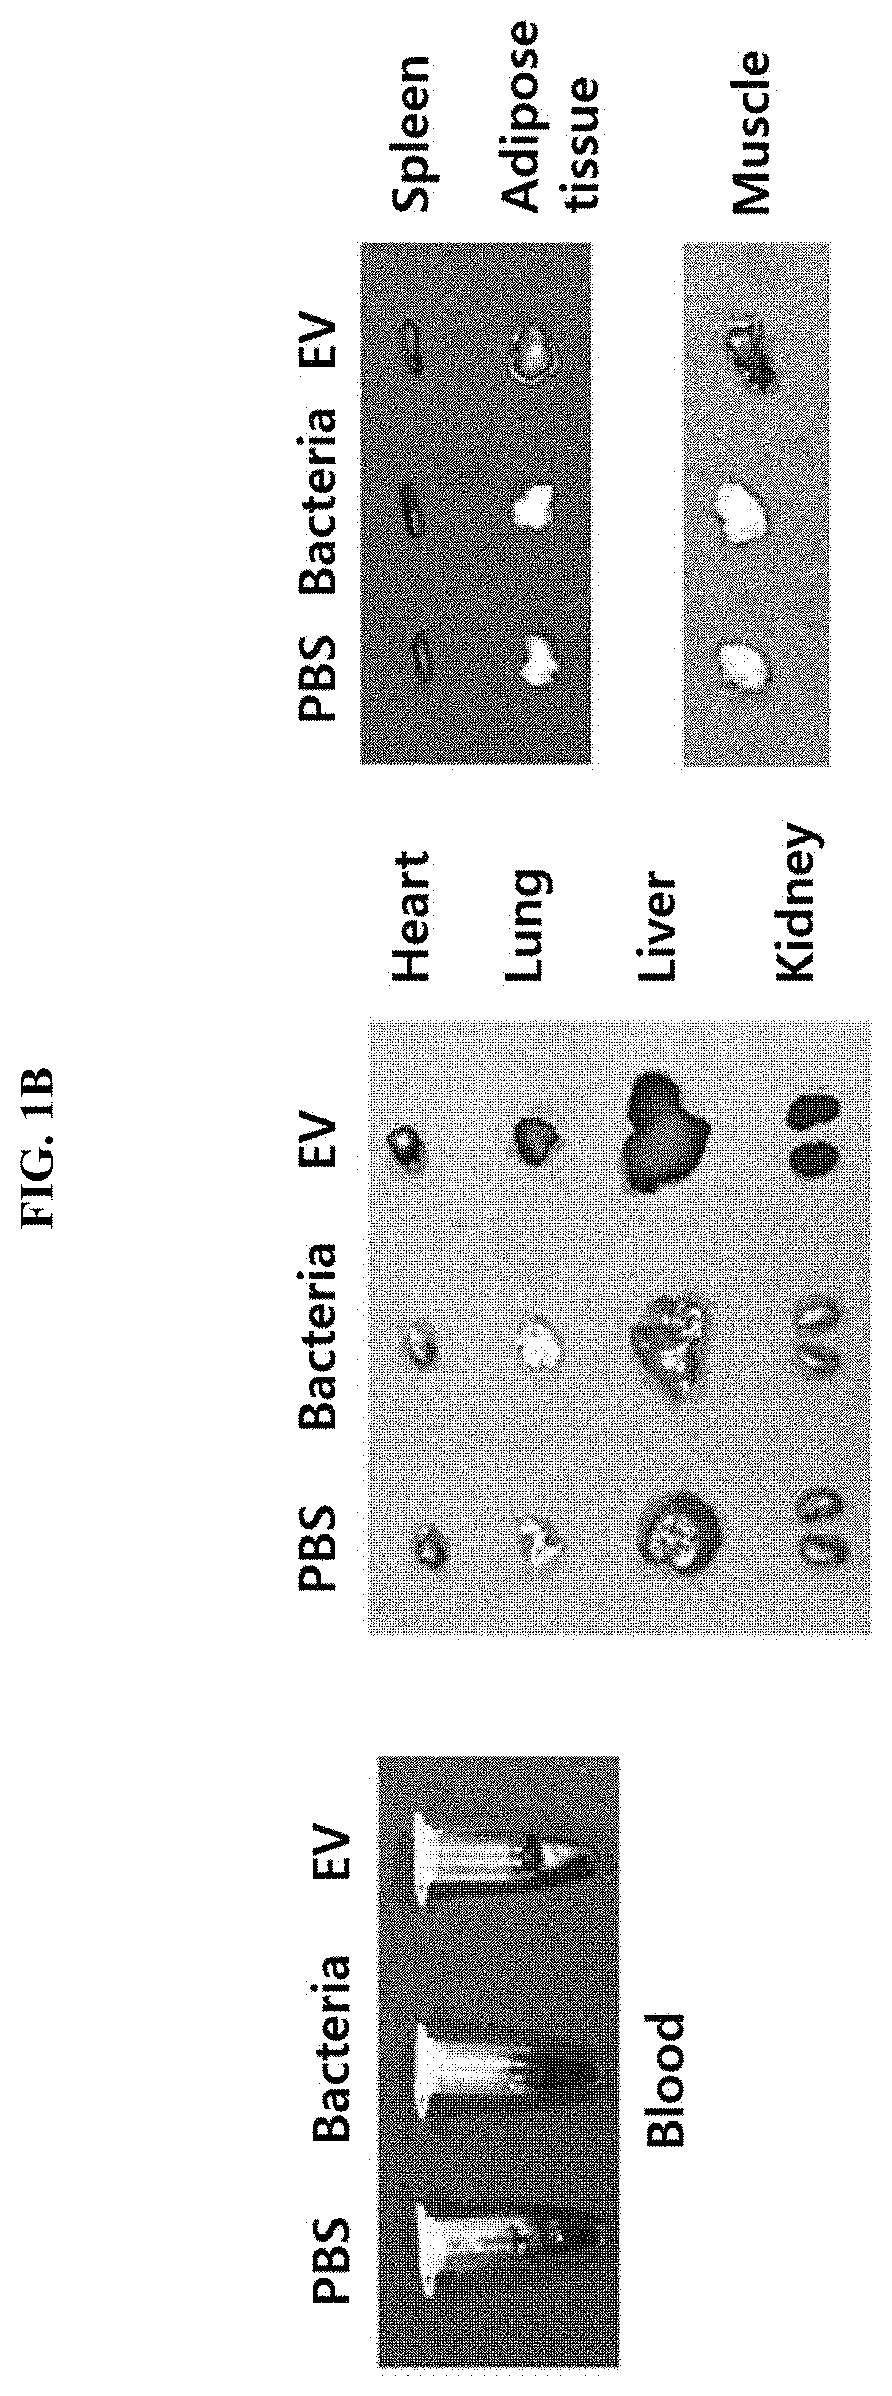 Nanovesicles derived from bacteria of genus rhodococcus, and use thereof